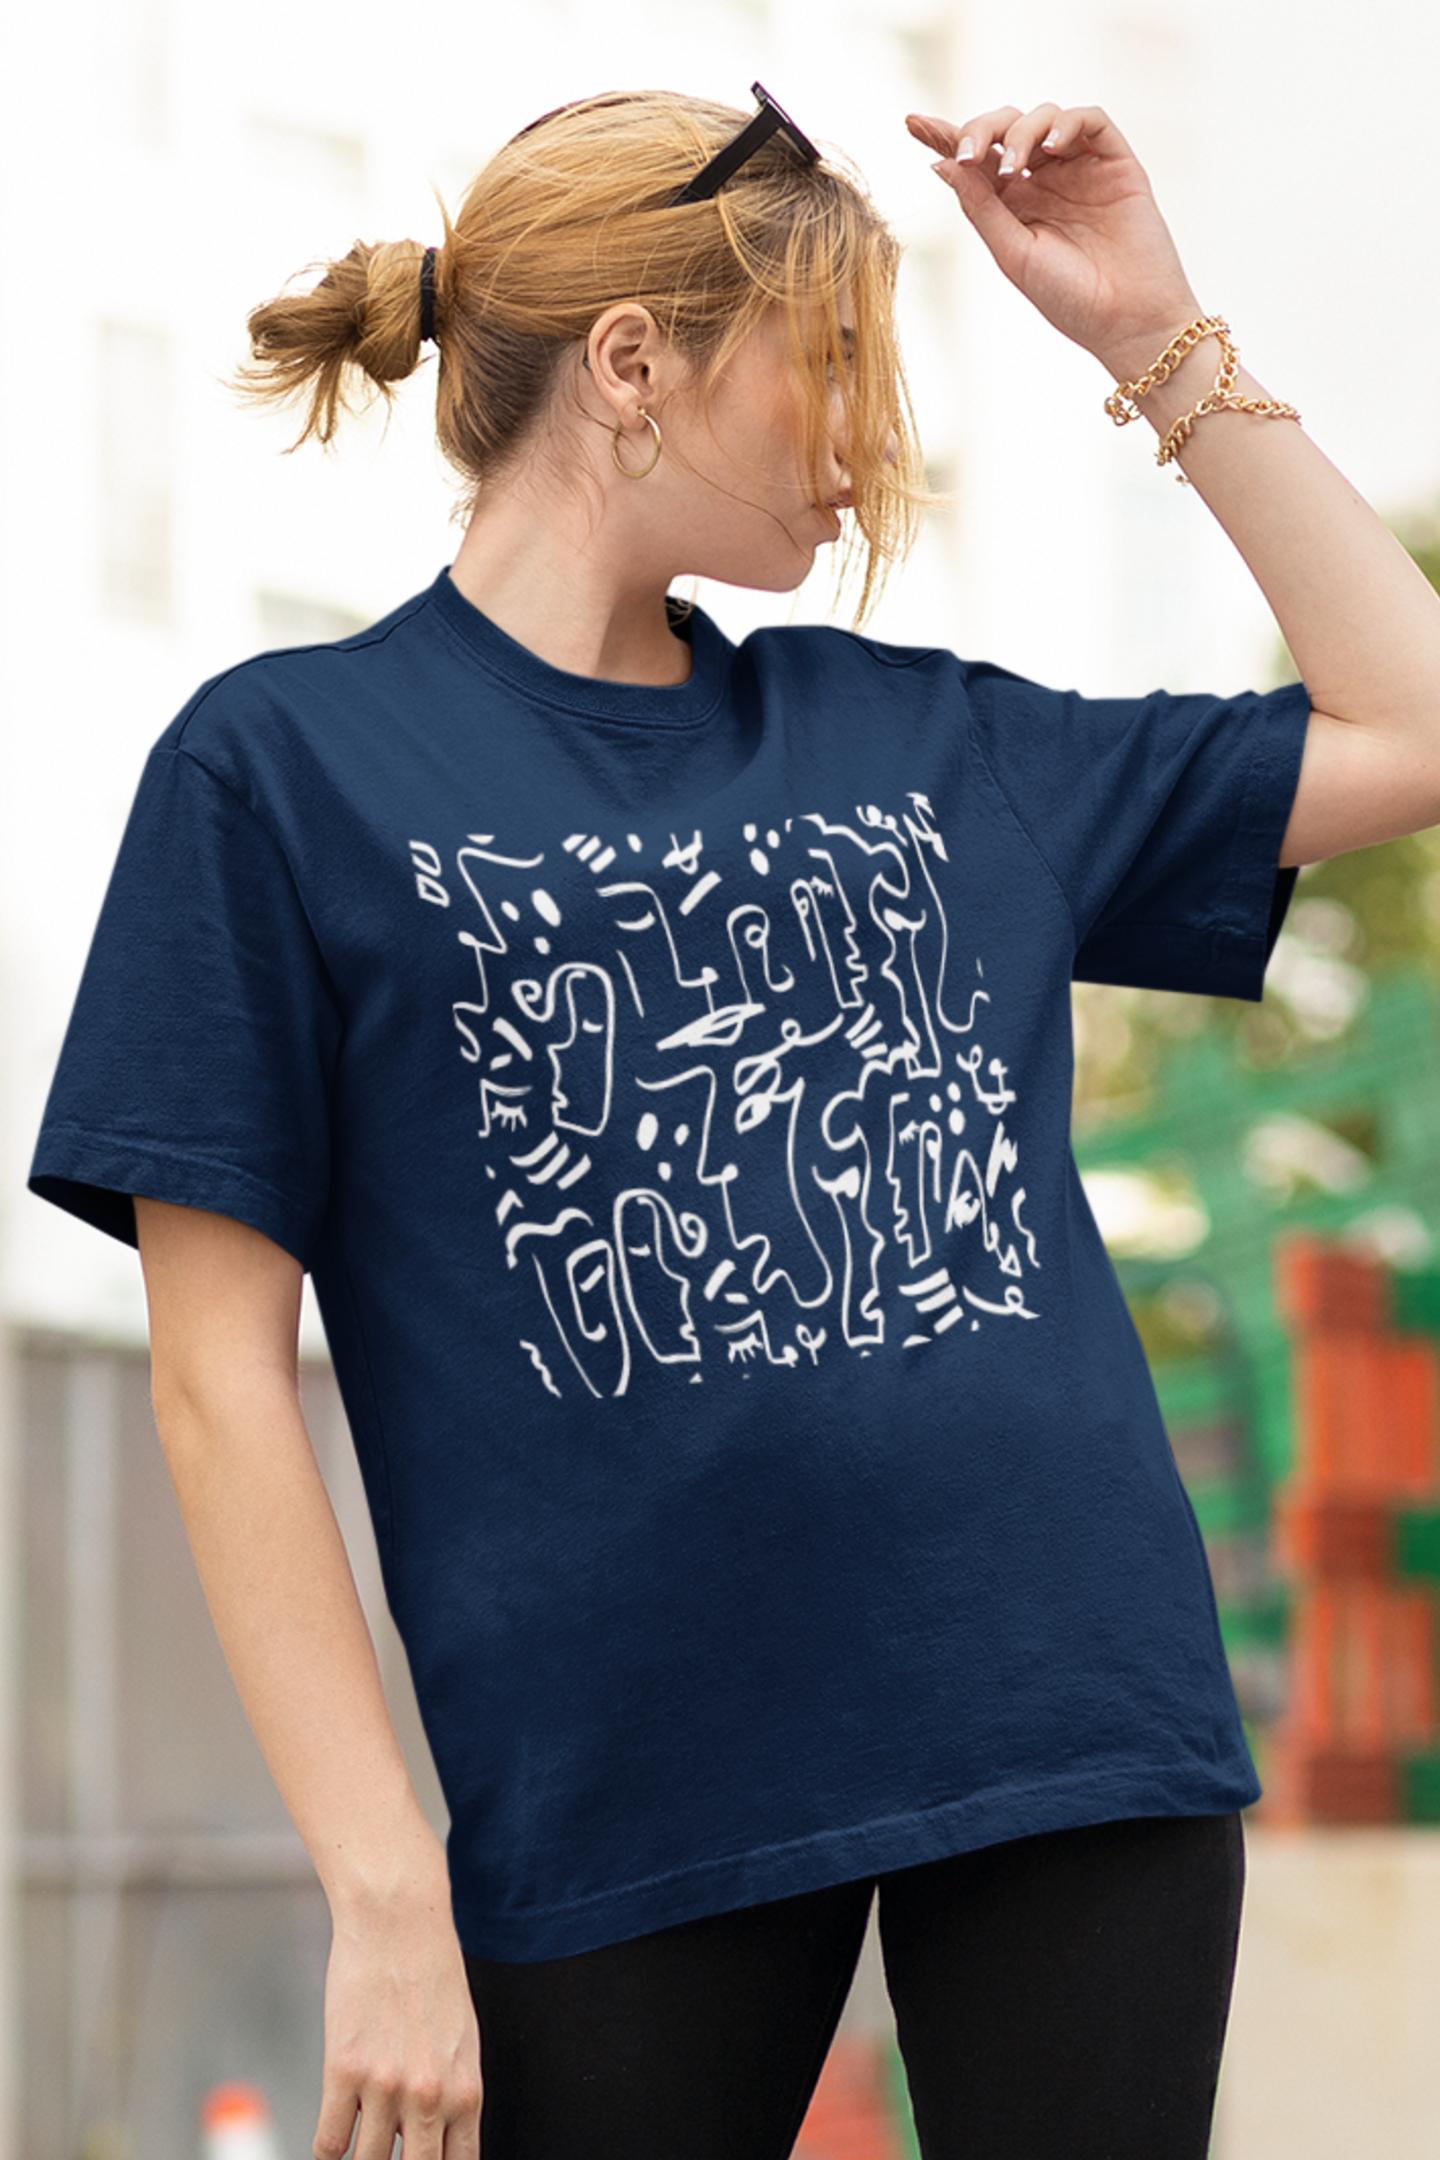 Faces of Abstraction T-shirt - Veesheh